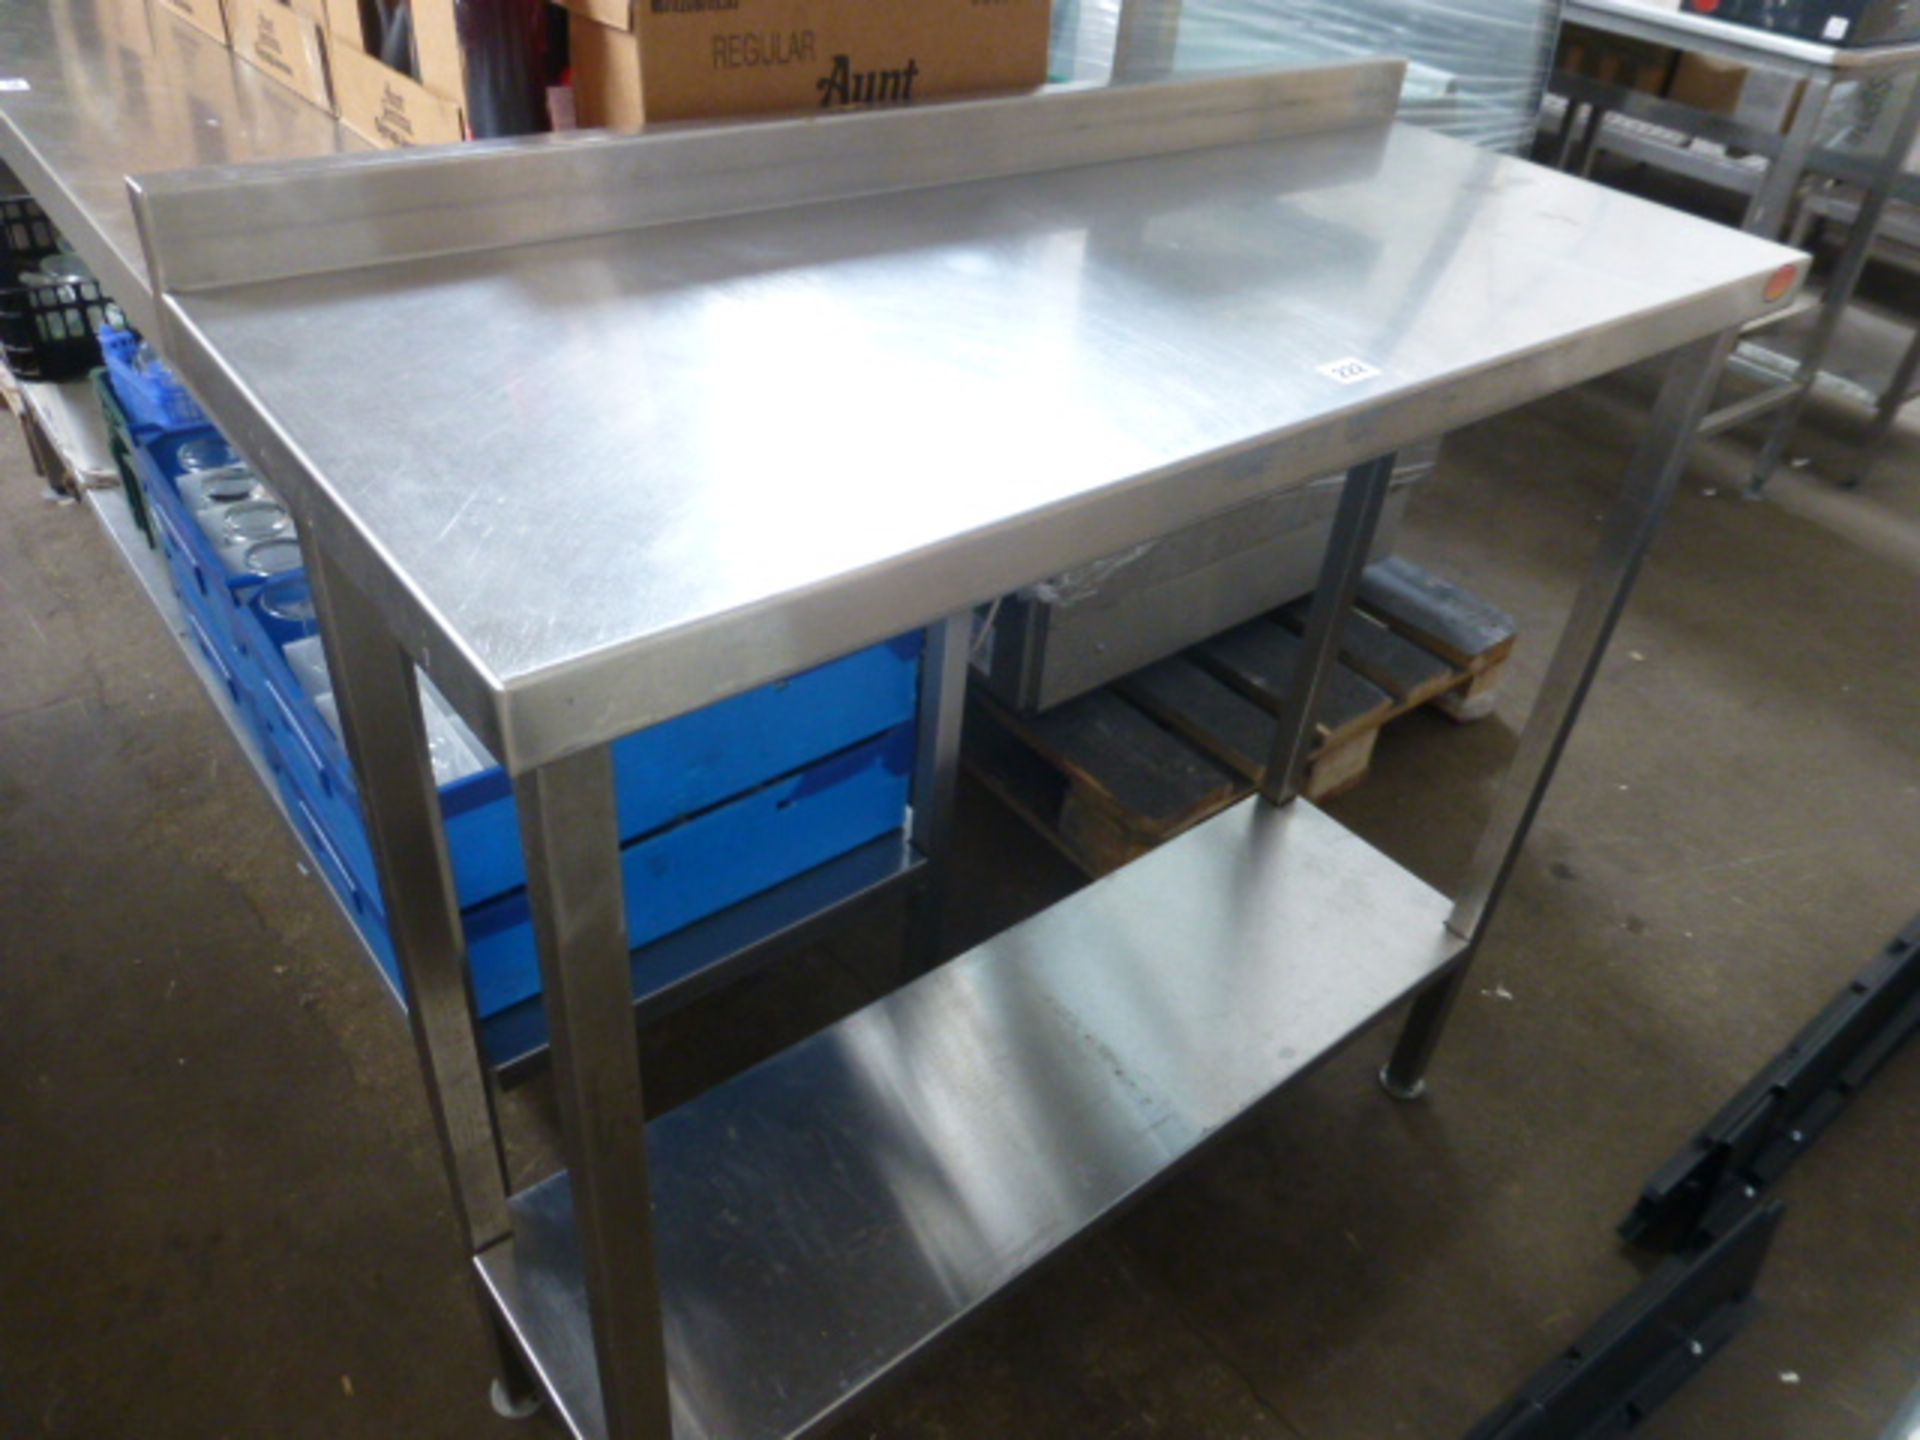 Shallow 100cm stainless steel preparation table with shelf under